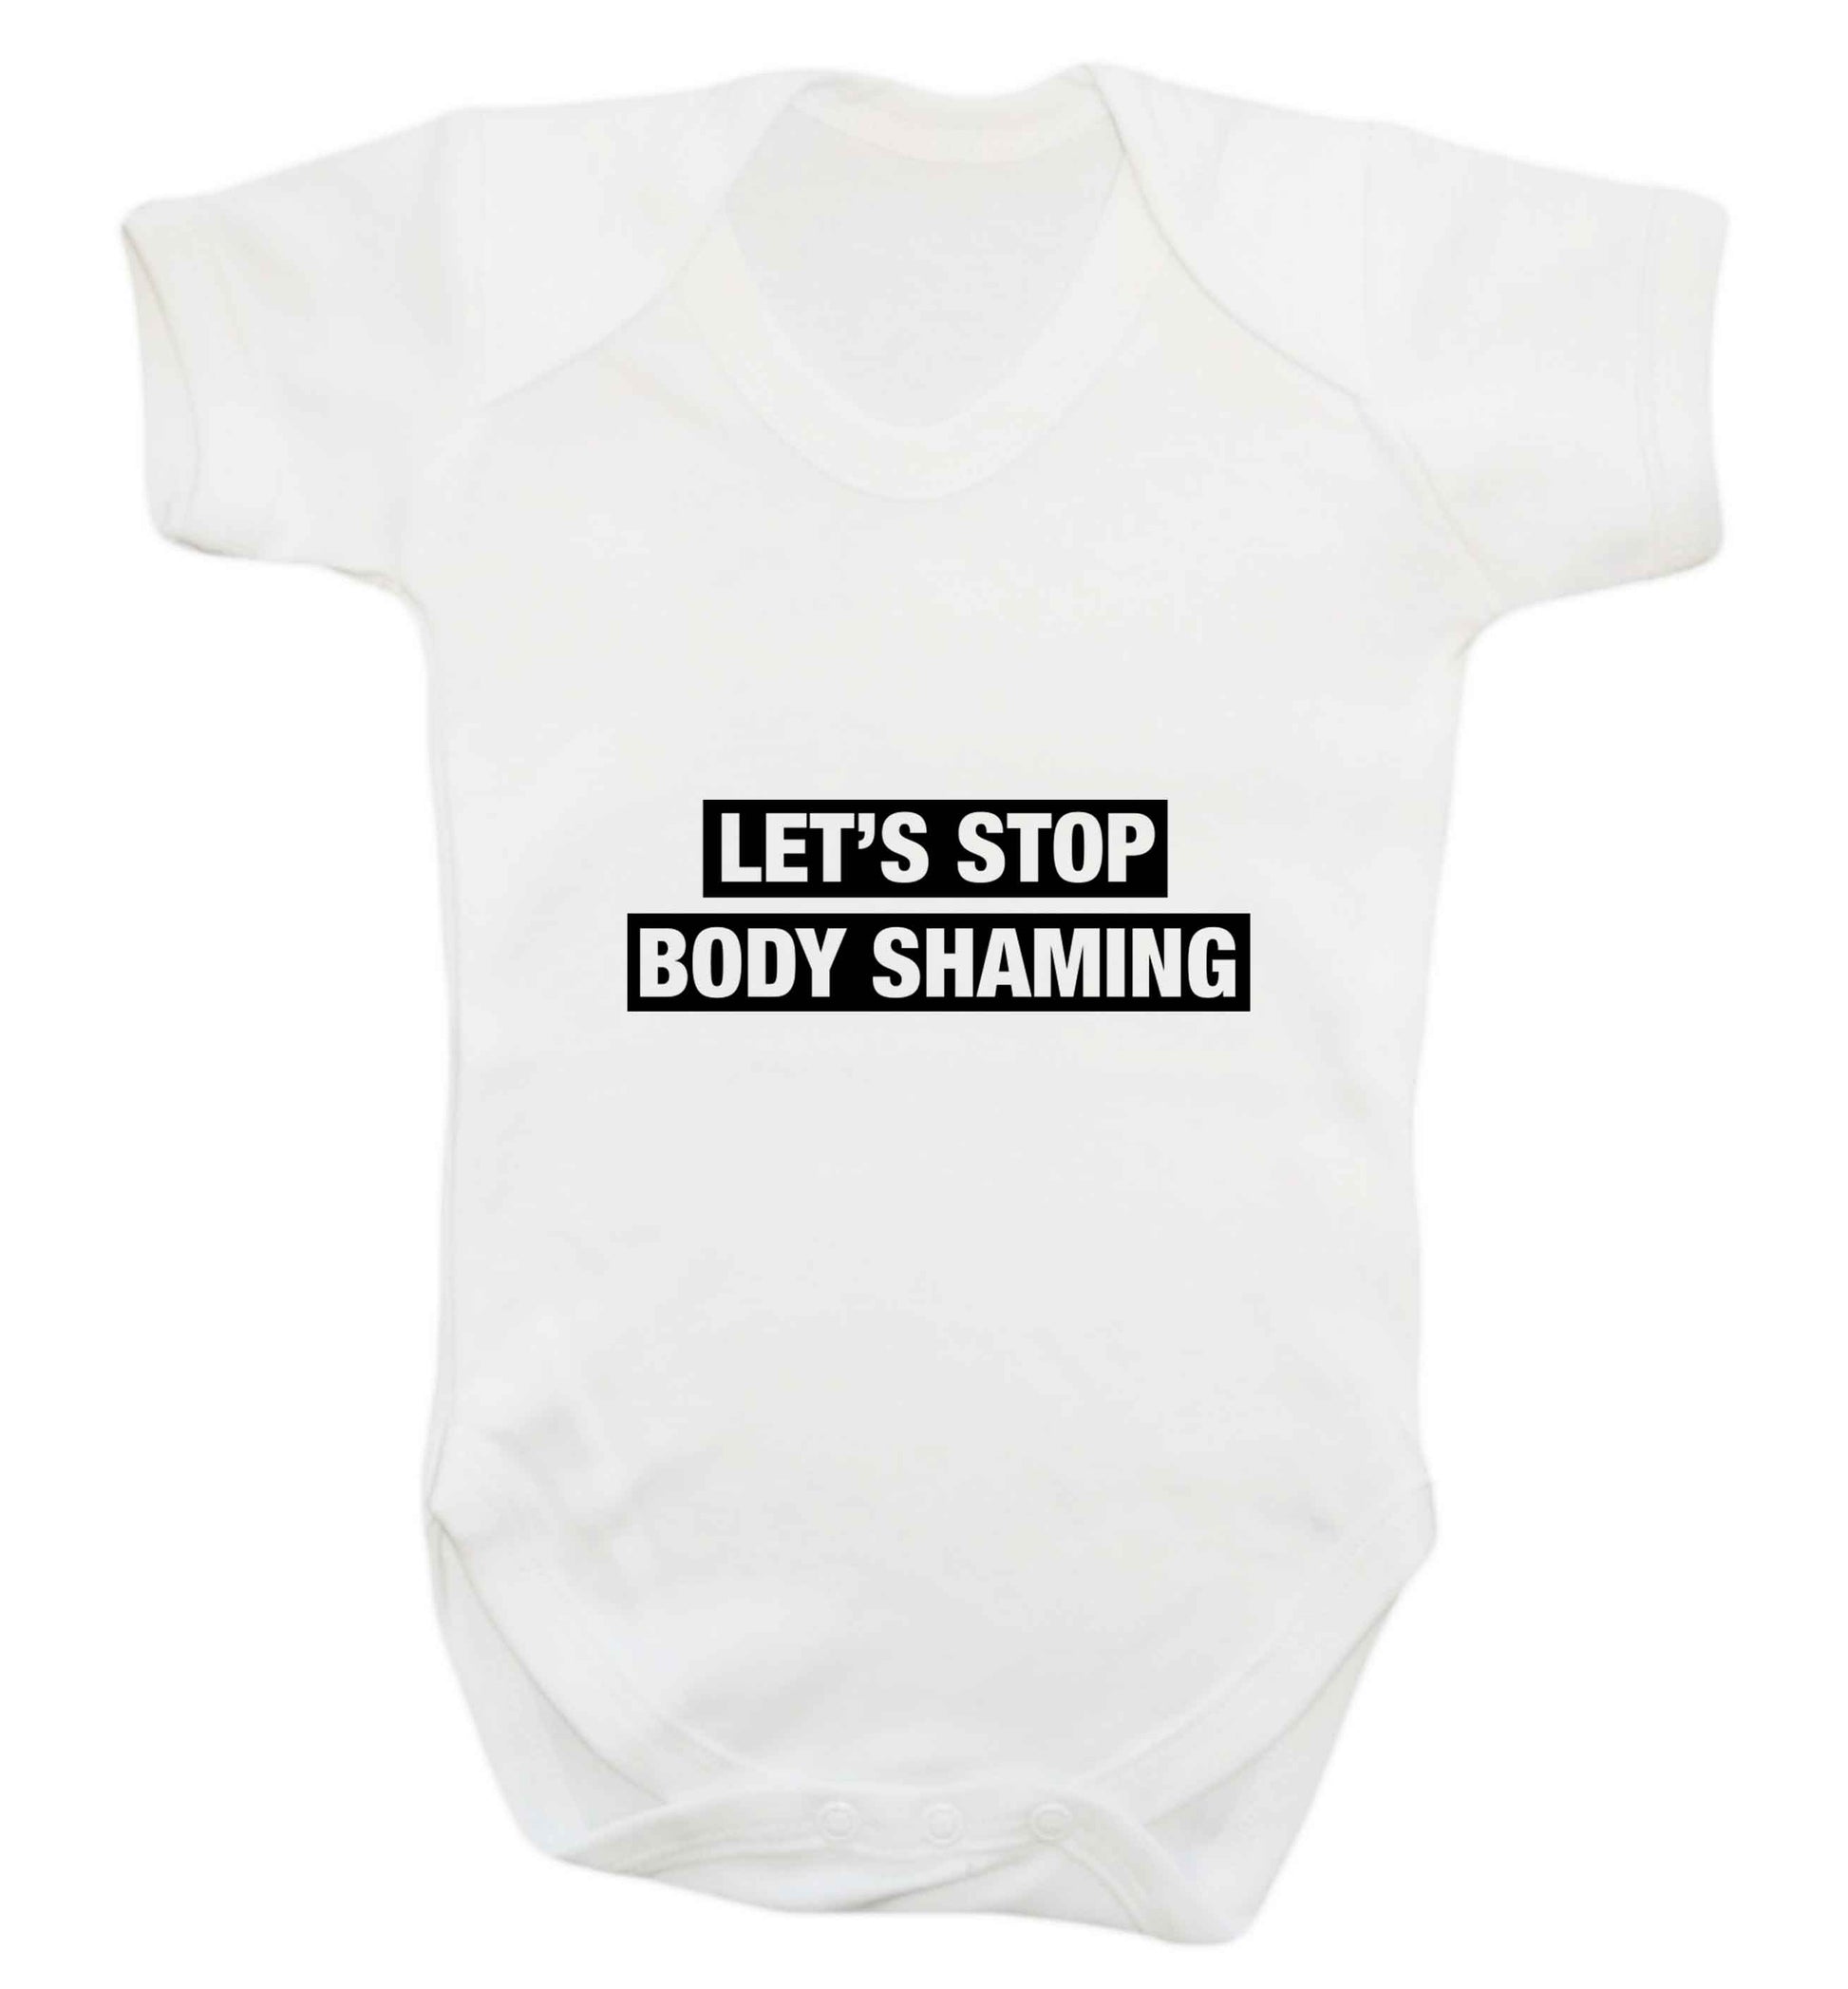 Let's stop body shaming baby vest white 18-24 months